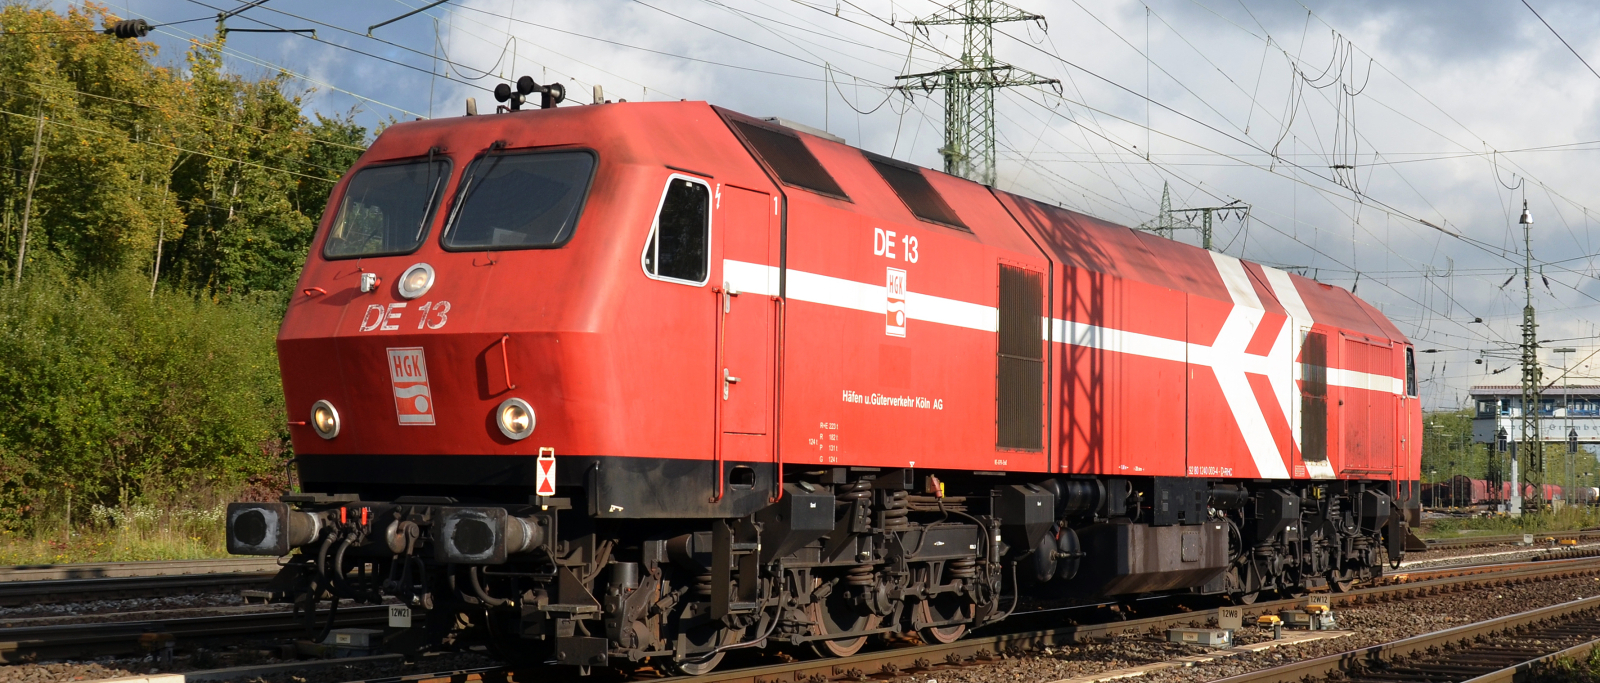 DE13 of the HGK in October 2013 in the Gremberg marshalling yard